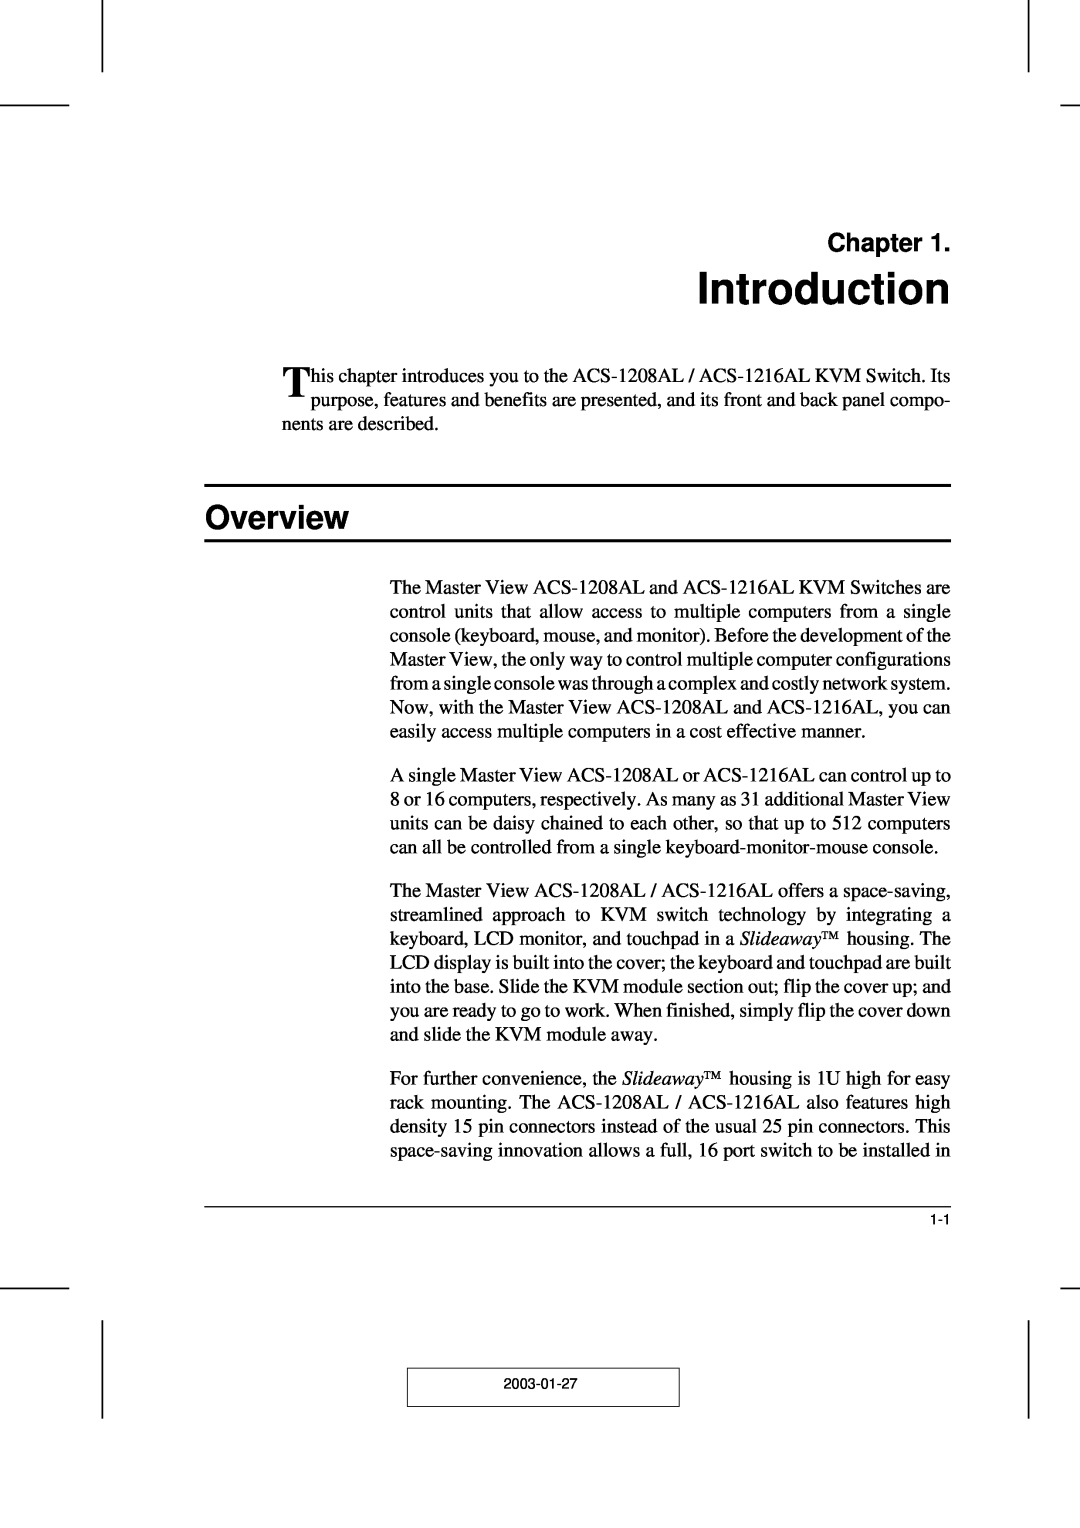 ATEN Technology ACS-1208AL, ACS-1216AL user manual Introduction, Overview, Chapter 